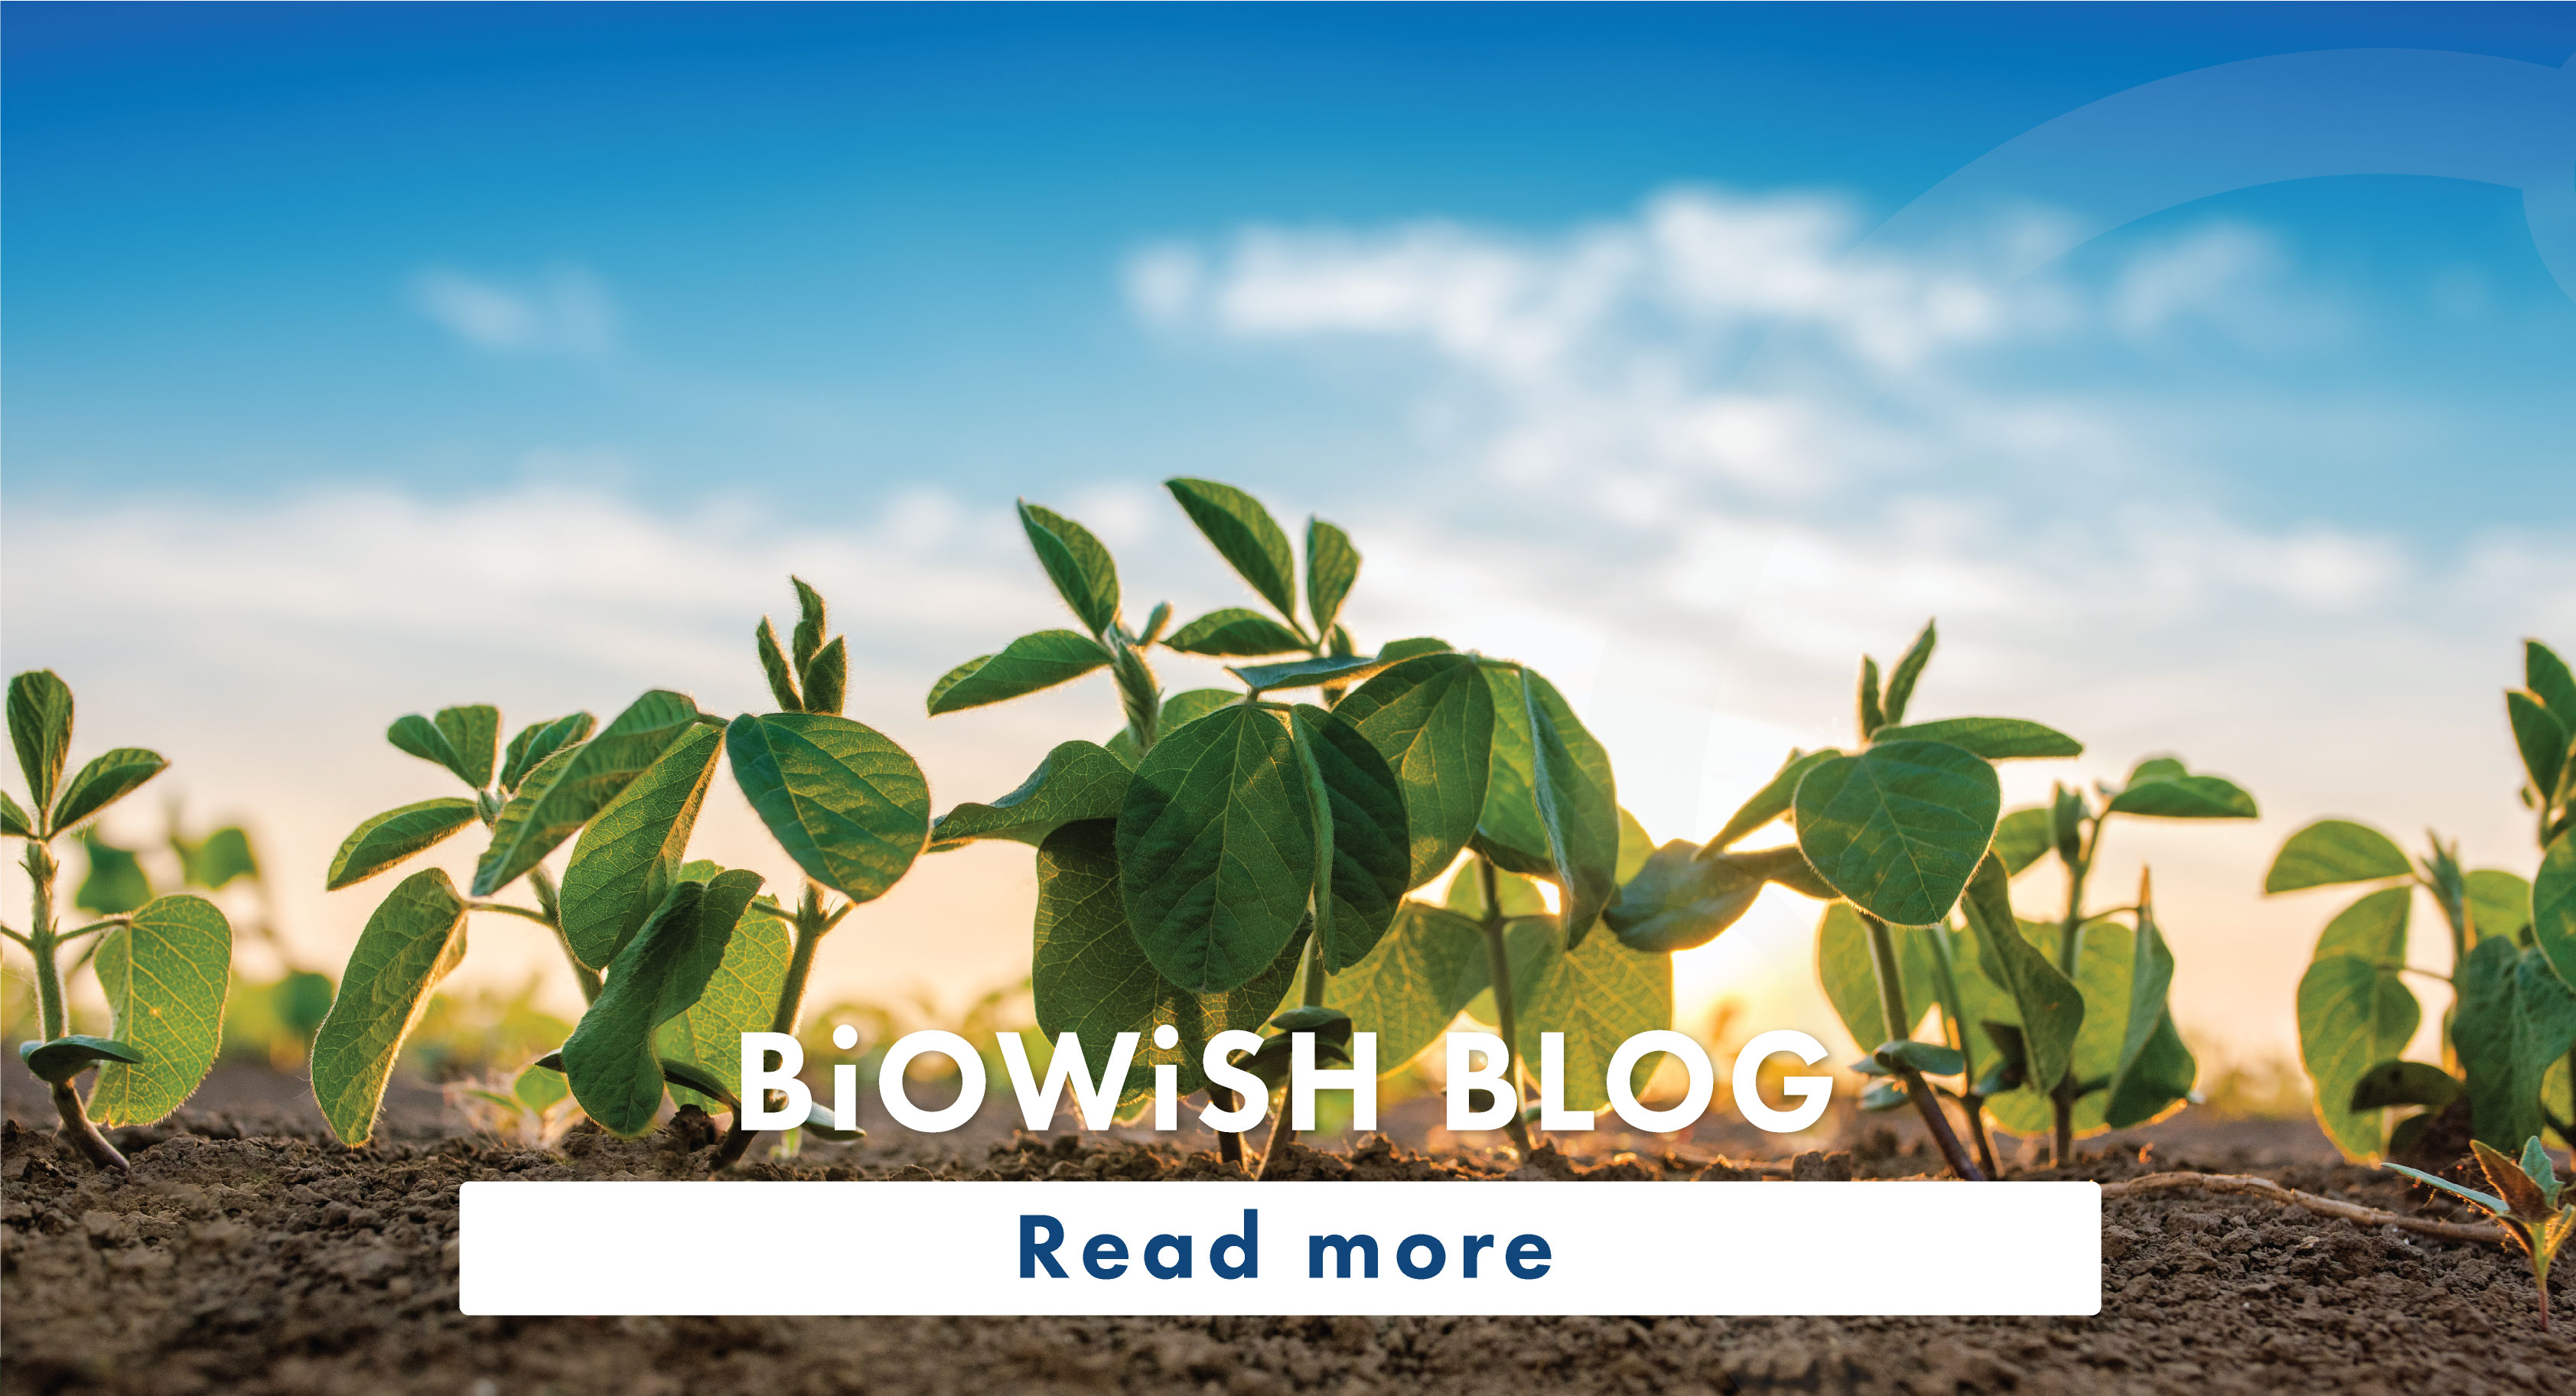 image of soybean plants growing in soil - Text reads BiOWiSH Blog - Read More